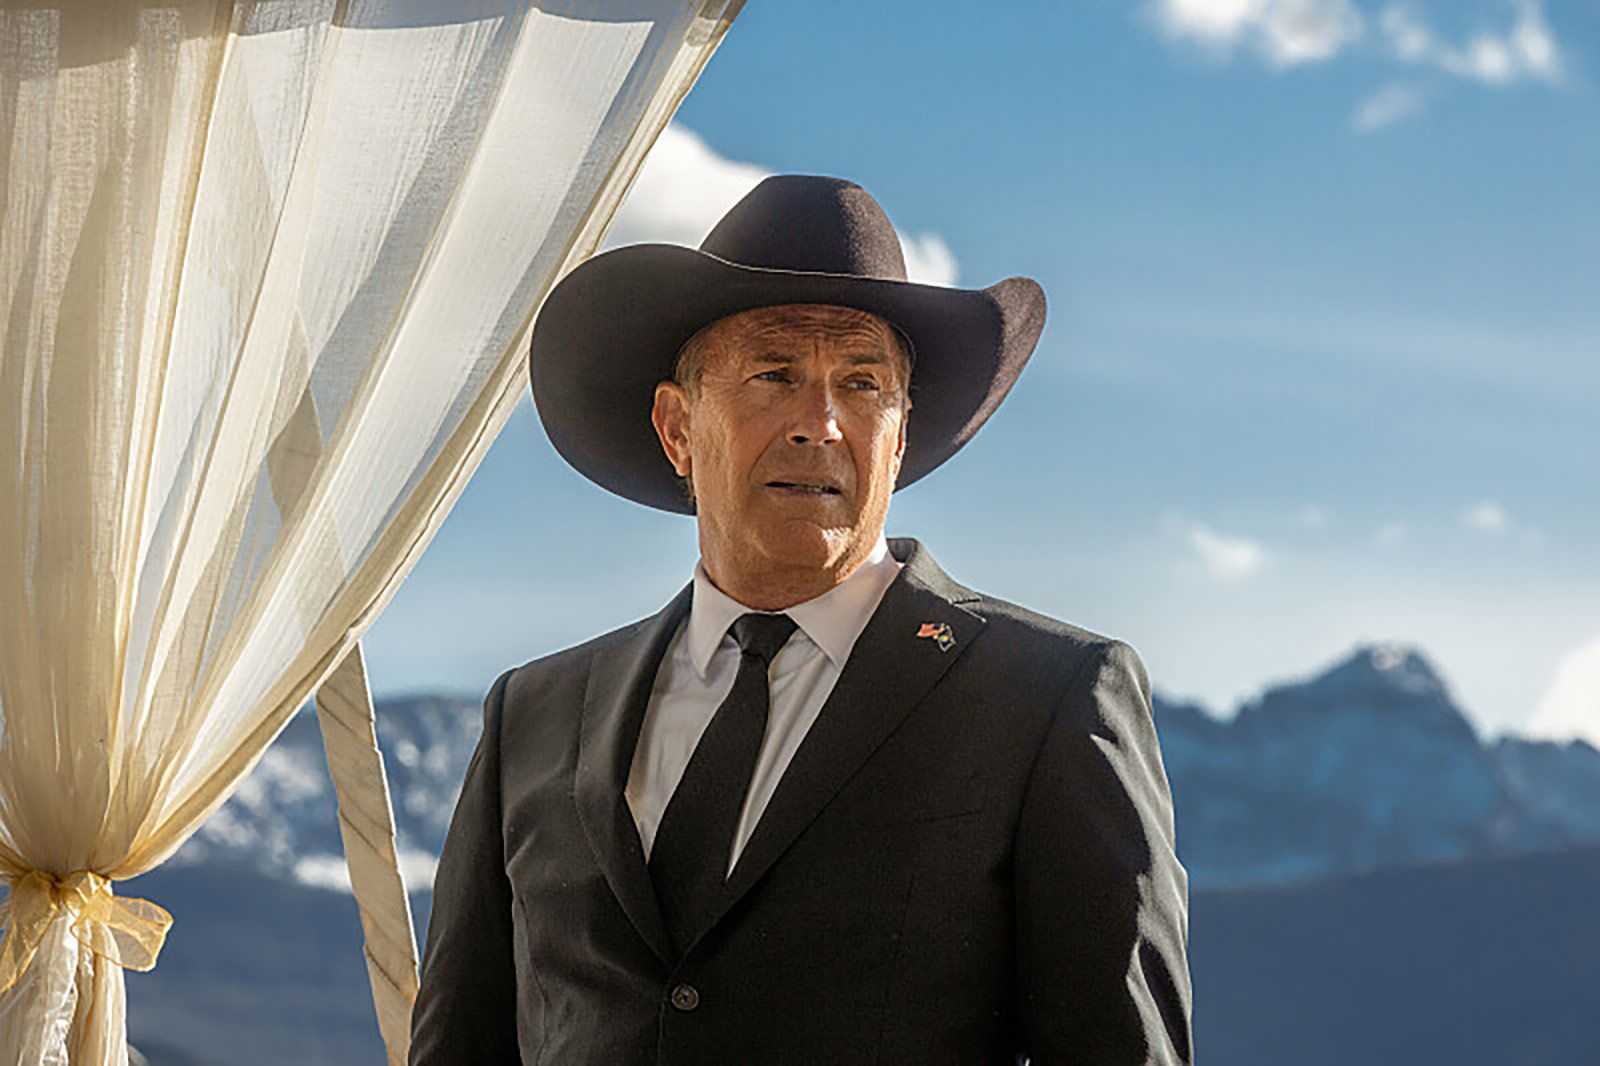 'A grave for Dutton': 'Yellowstone's' post-Kevin Costner era, will it be a success or downfall?